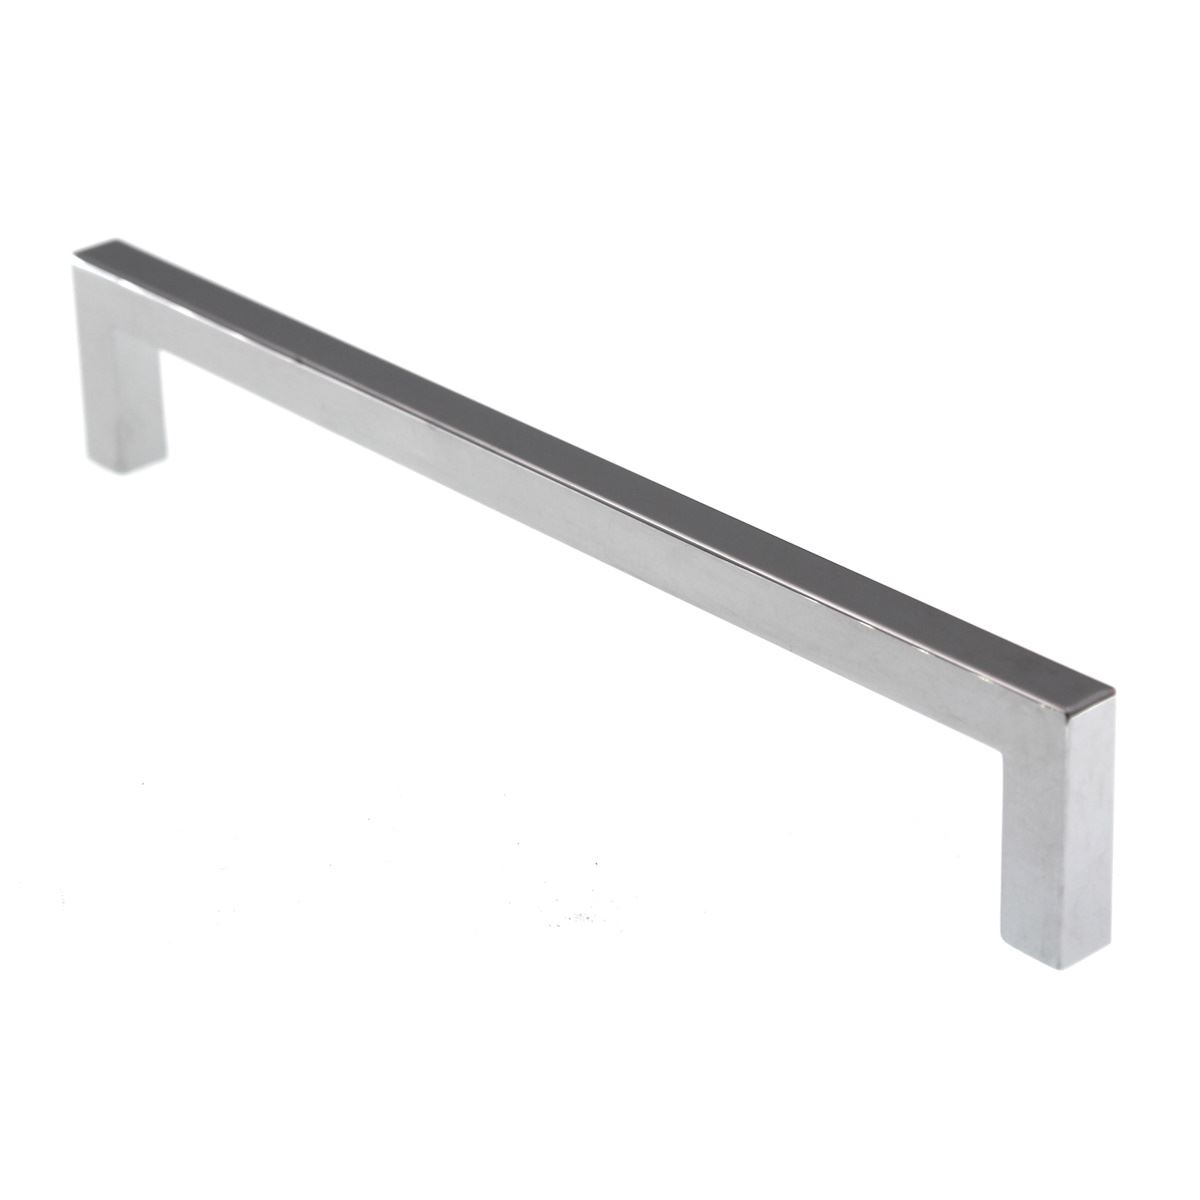 Pride Modern Square Cabinet Pull 7 1/2" (192mm) Ctr Polished Chrome P87229-PC